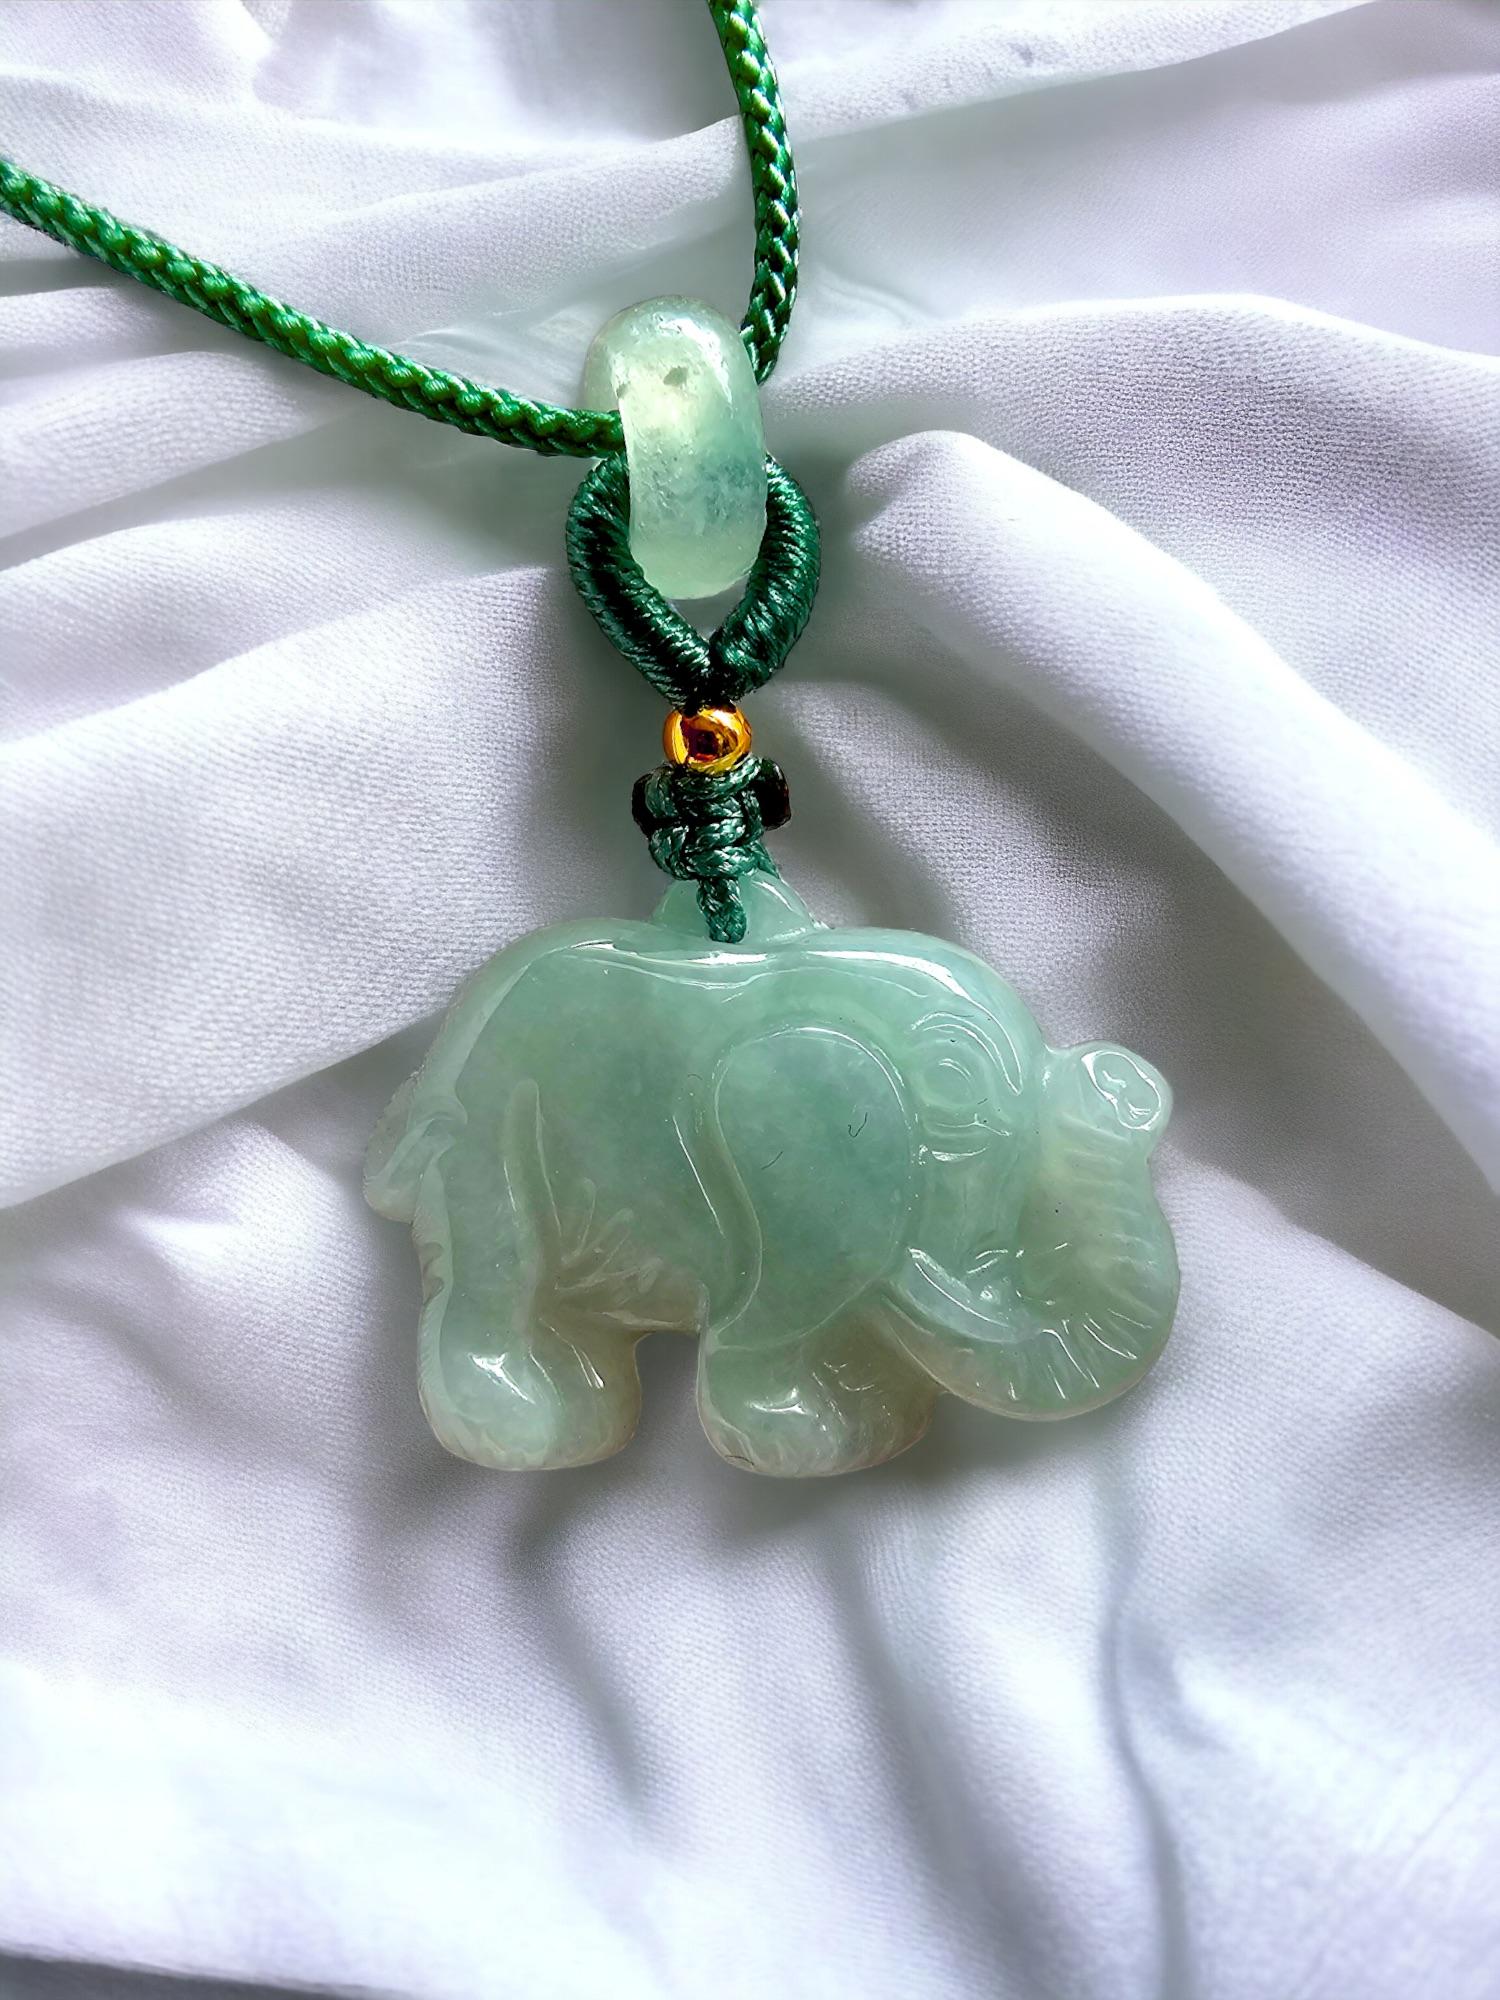 Sapporo Burmese Green A-Jadeite Elephant Pendant Necklace with FYORO String

Using Handpicked high translucency and carved natural Burmese A-Jadeite. We created an elephant design with inspiration notes from Sapporo, Japan. We allow the natural hues